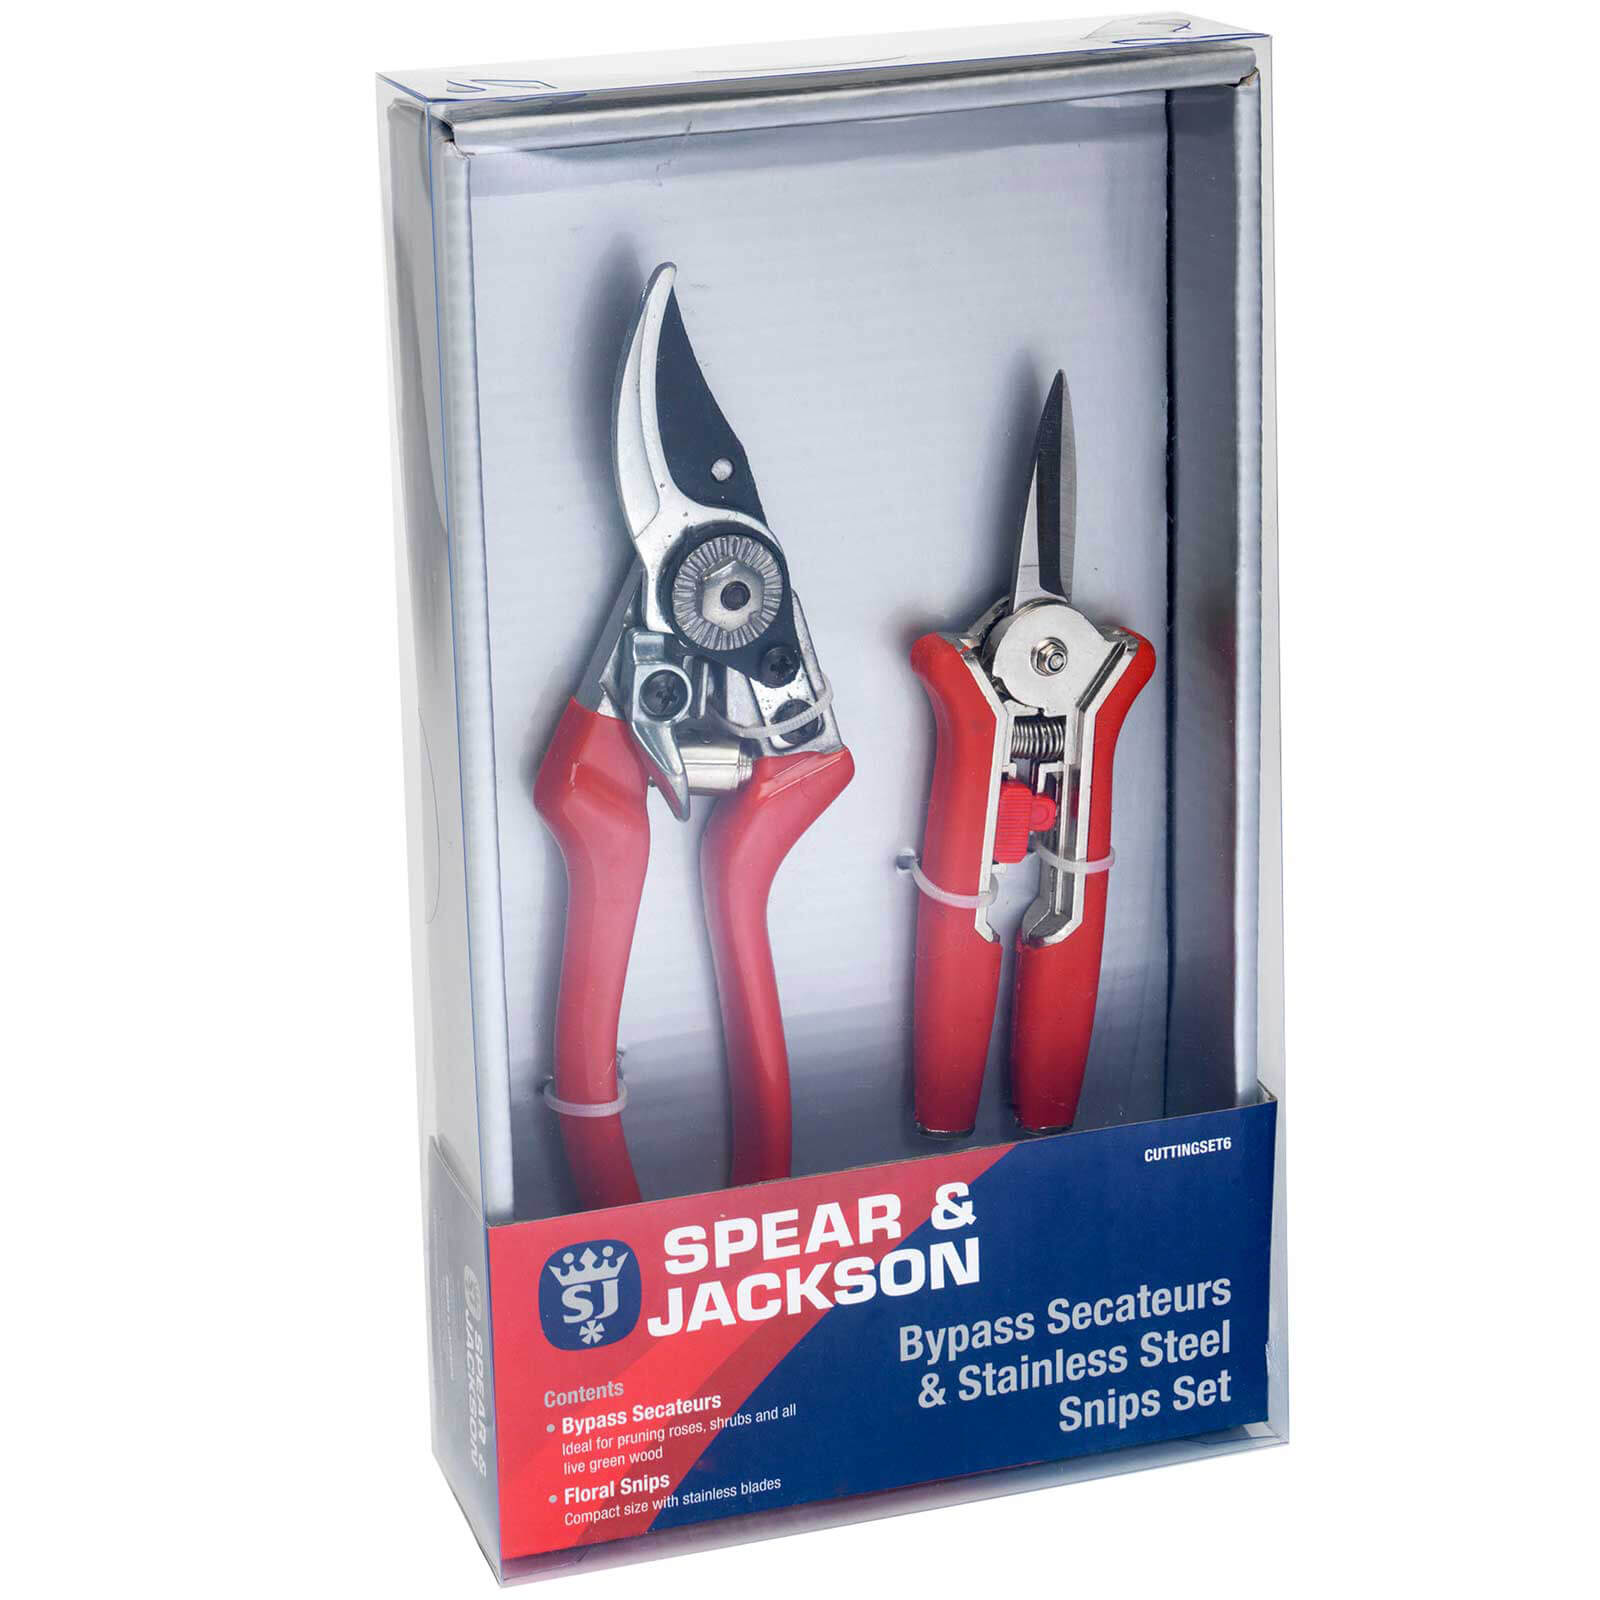 Image of Spear and Jackson Bypass Secateurs and Mini Snips Set